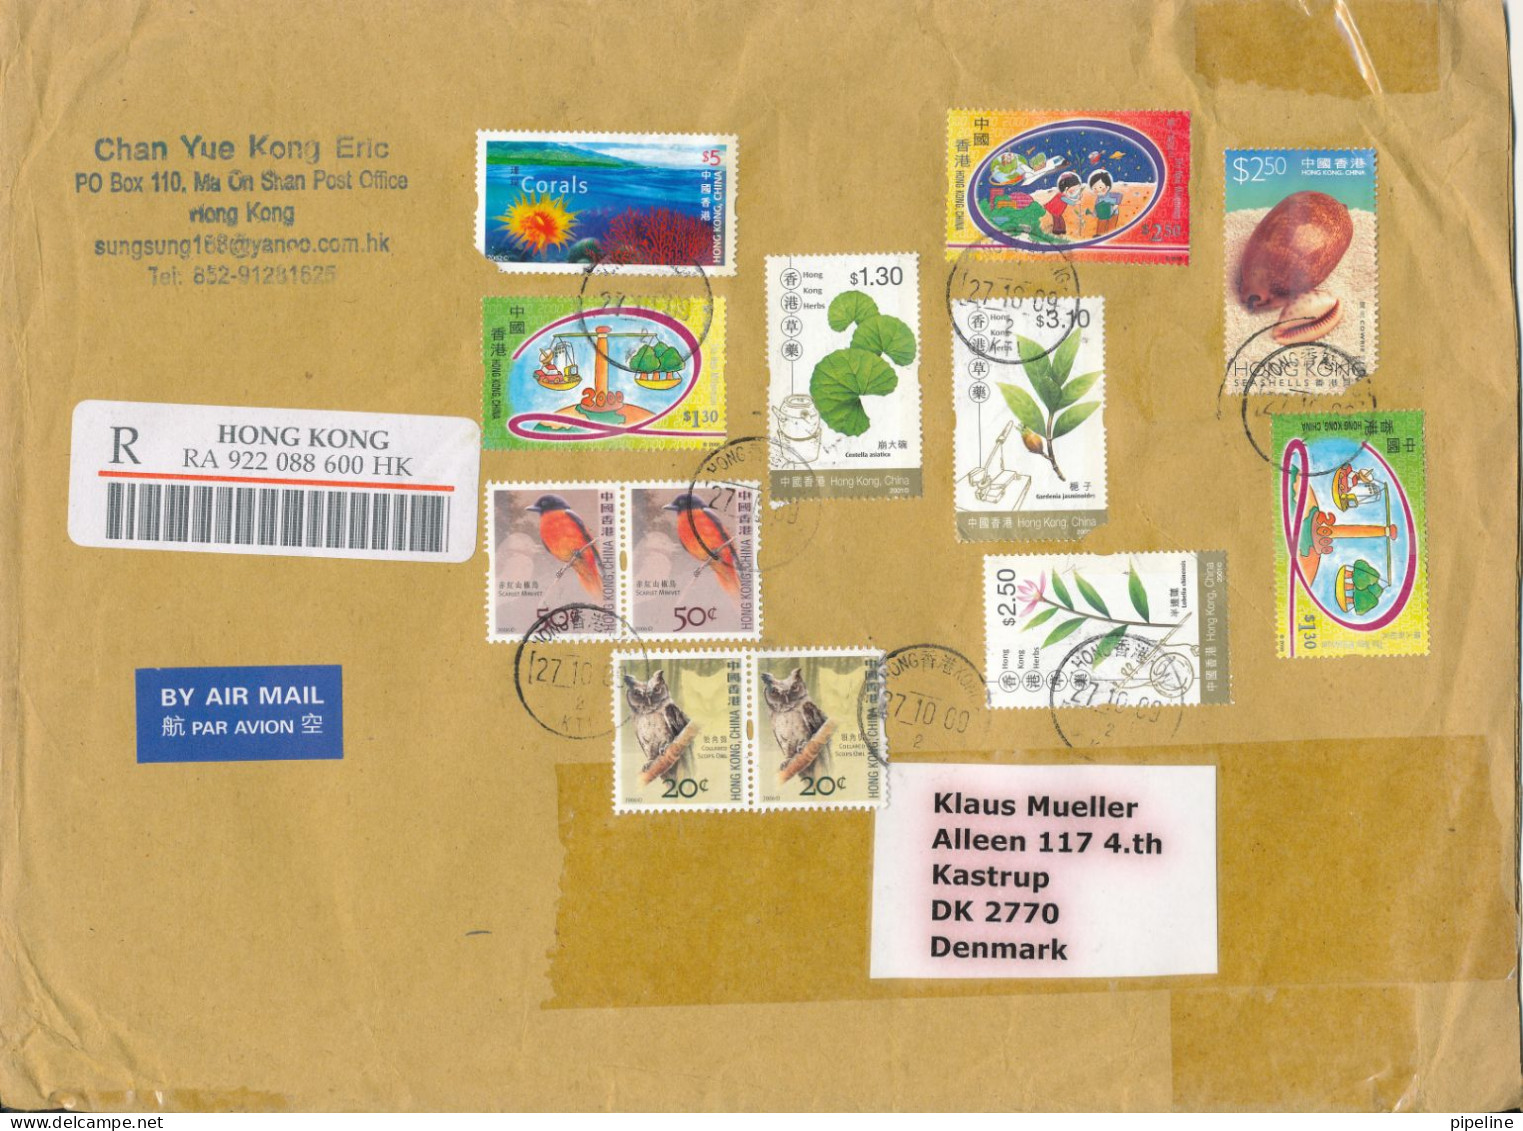 Hong Kong Registered Cover Sent Air Mail To Denmark 27-10-2009 Topic Stamps Big Size Cover 2 Stamps Are Damaged - Lettres & Documents